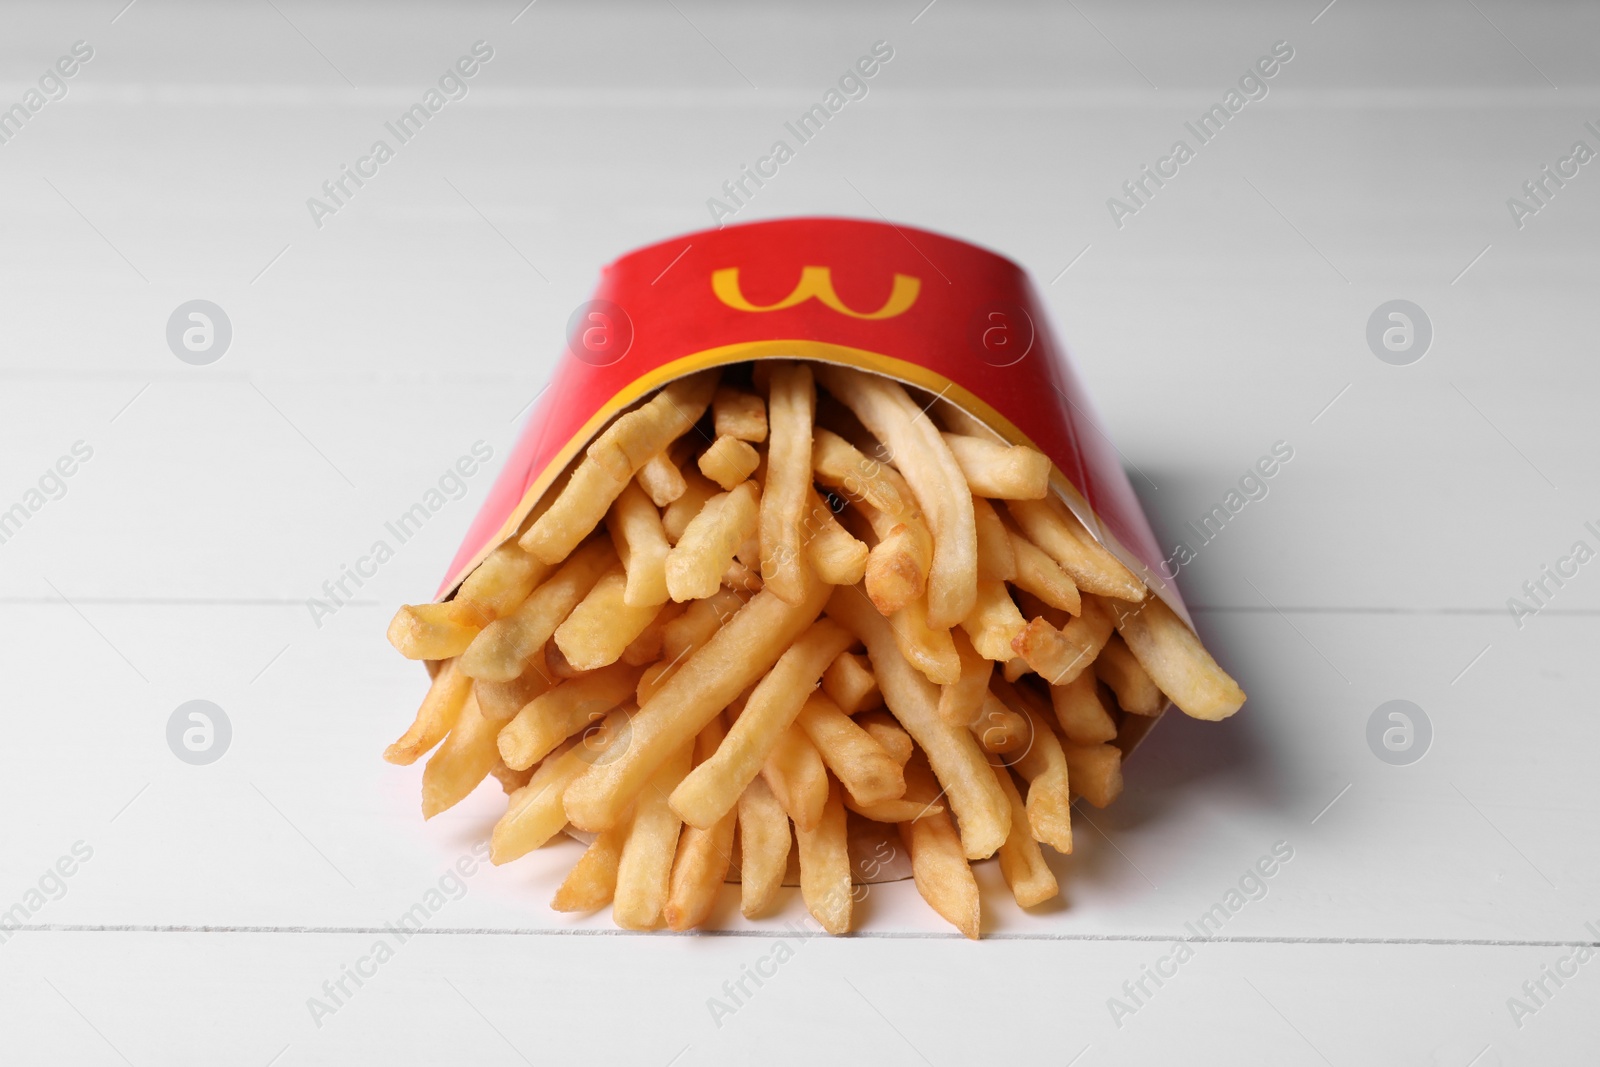 Photo of MYKOLAIV, UKRAINE - AUGUST 12, 2021: Big portion of McDonald's French fries on white wooden table